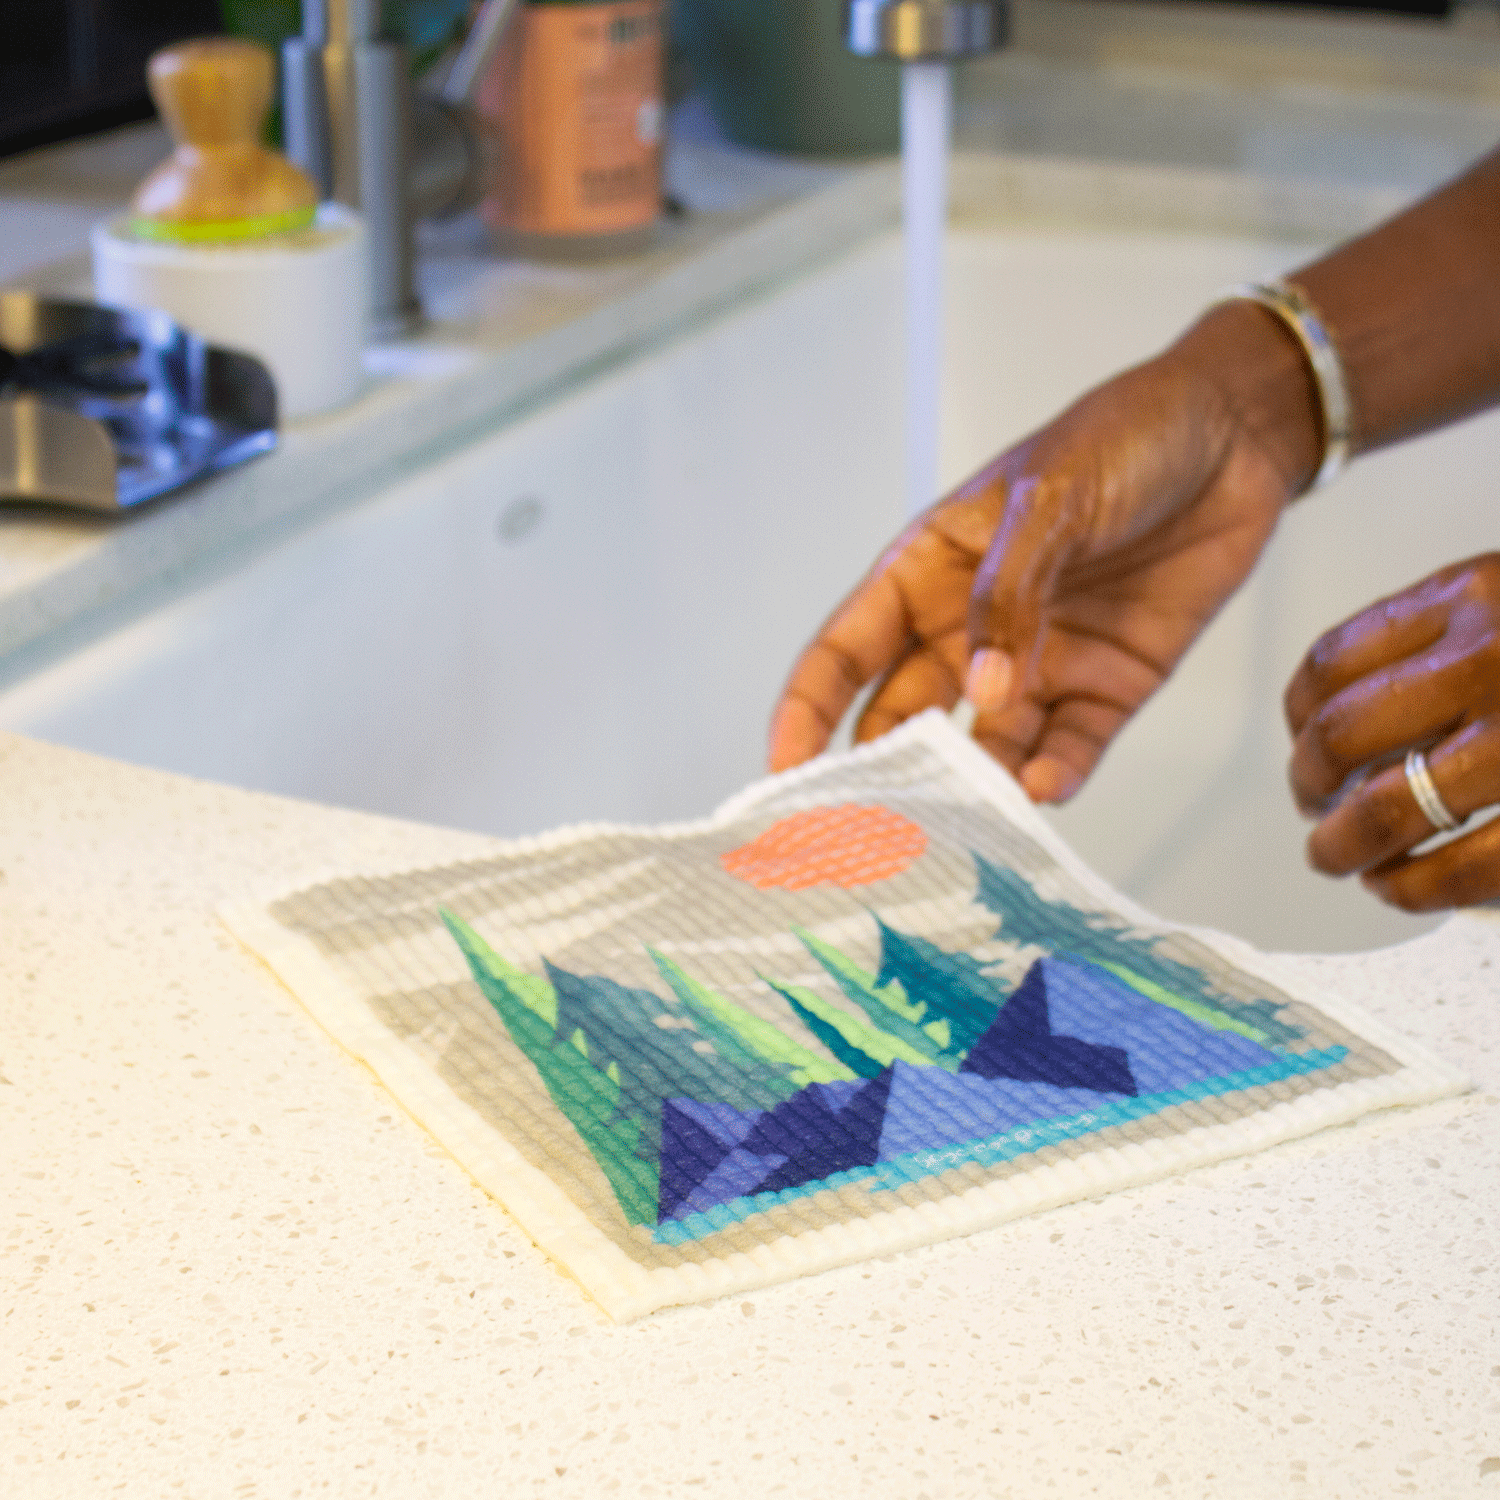 Two hands hold the Pacific Northwest sponge cloth near the edge of a kitchen sink. There is an abstract geometric forest scene printed on the sponge cloth.